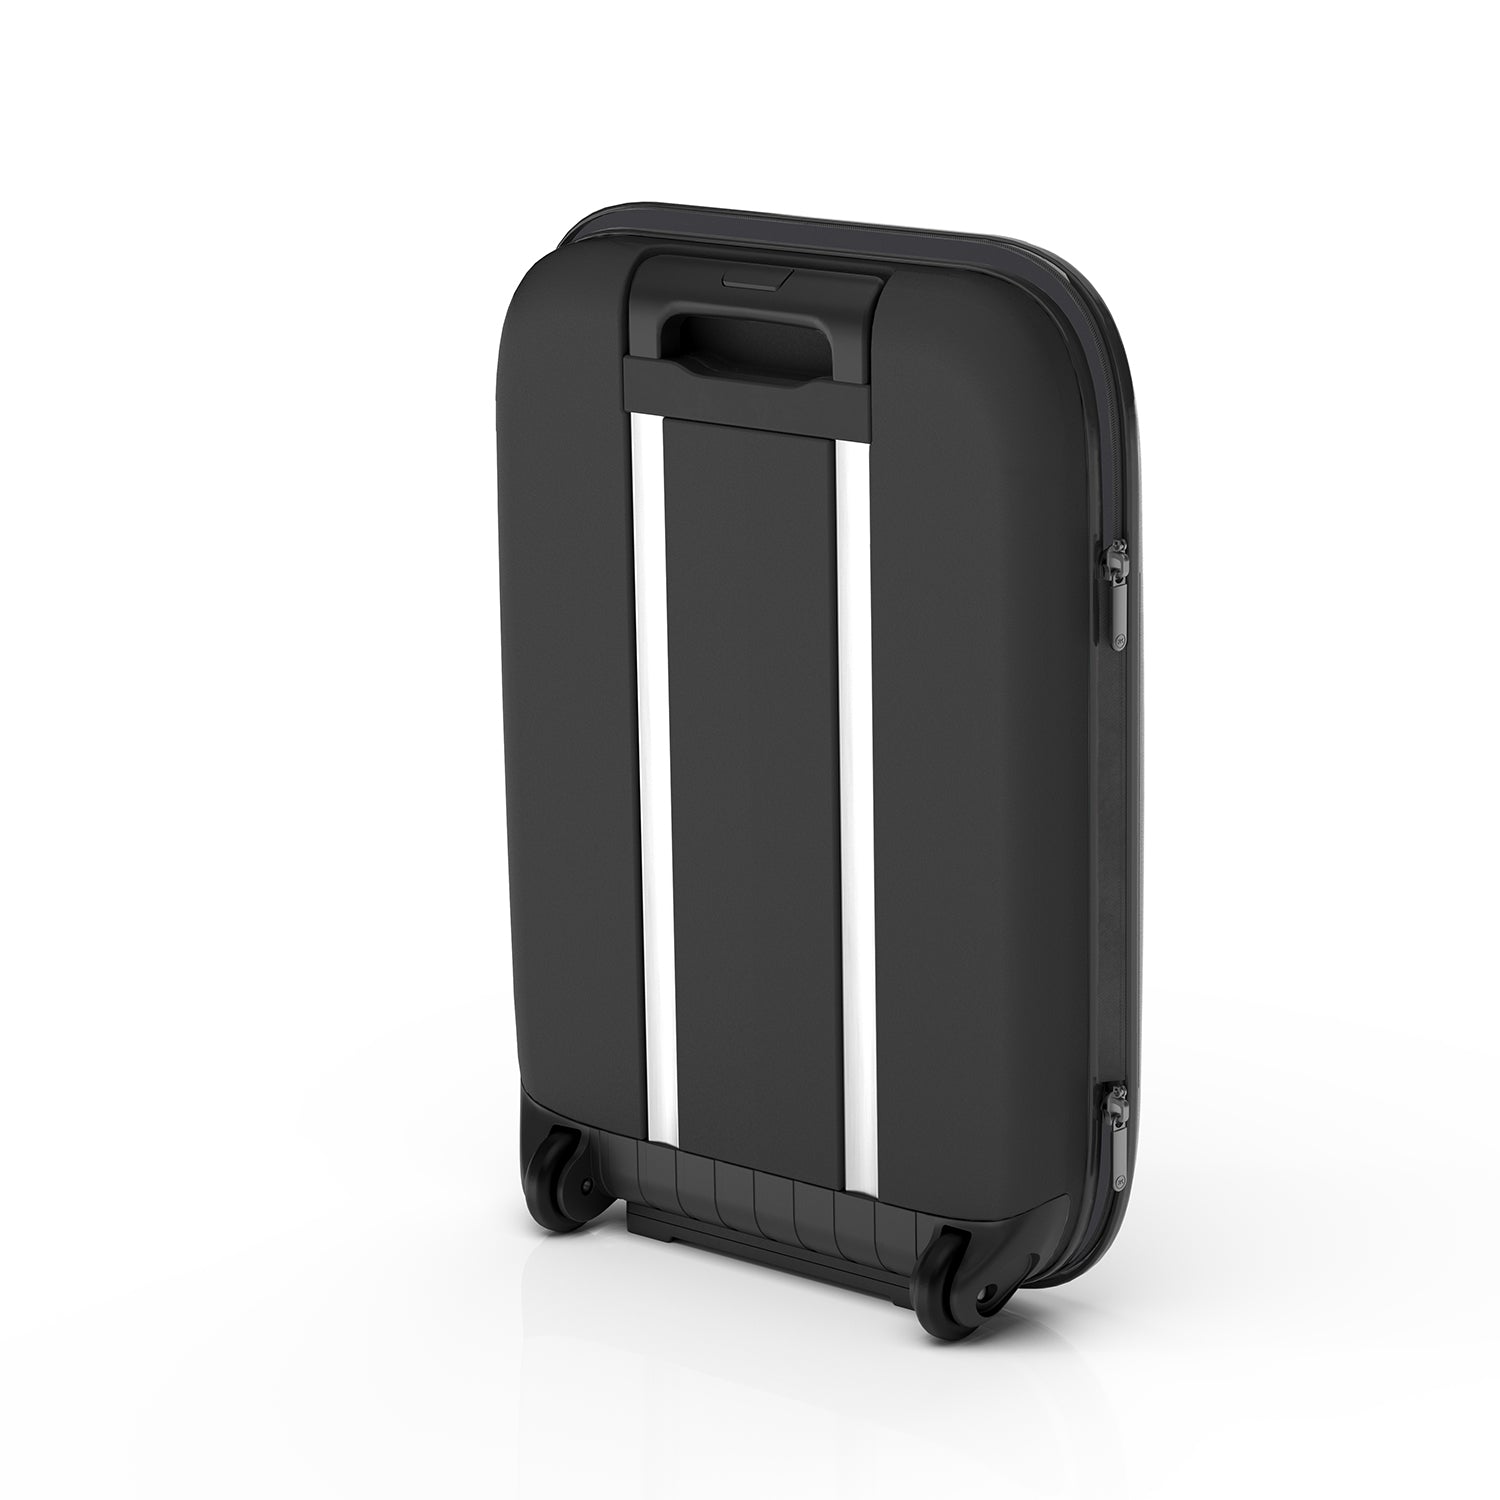 Rollink Flex Vega II Collapsible Carry-On Suitcase - 21inch